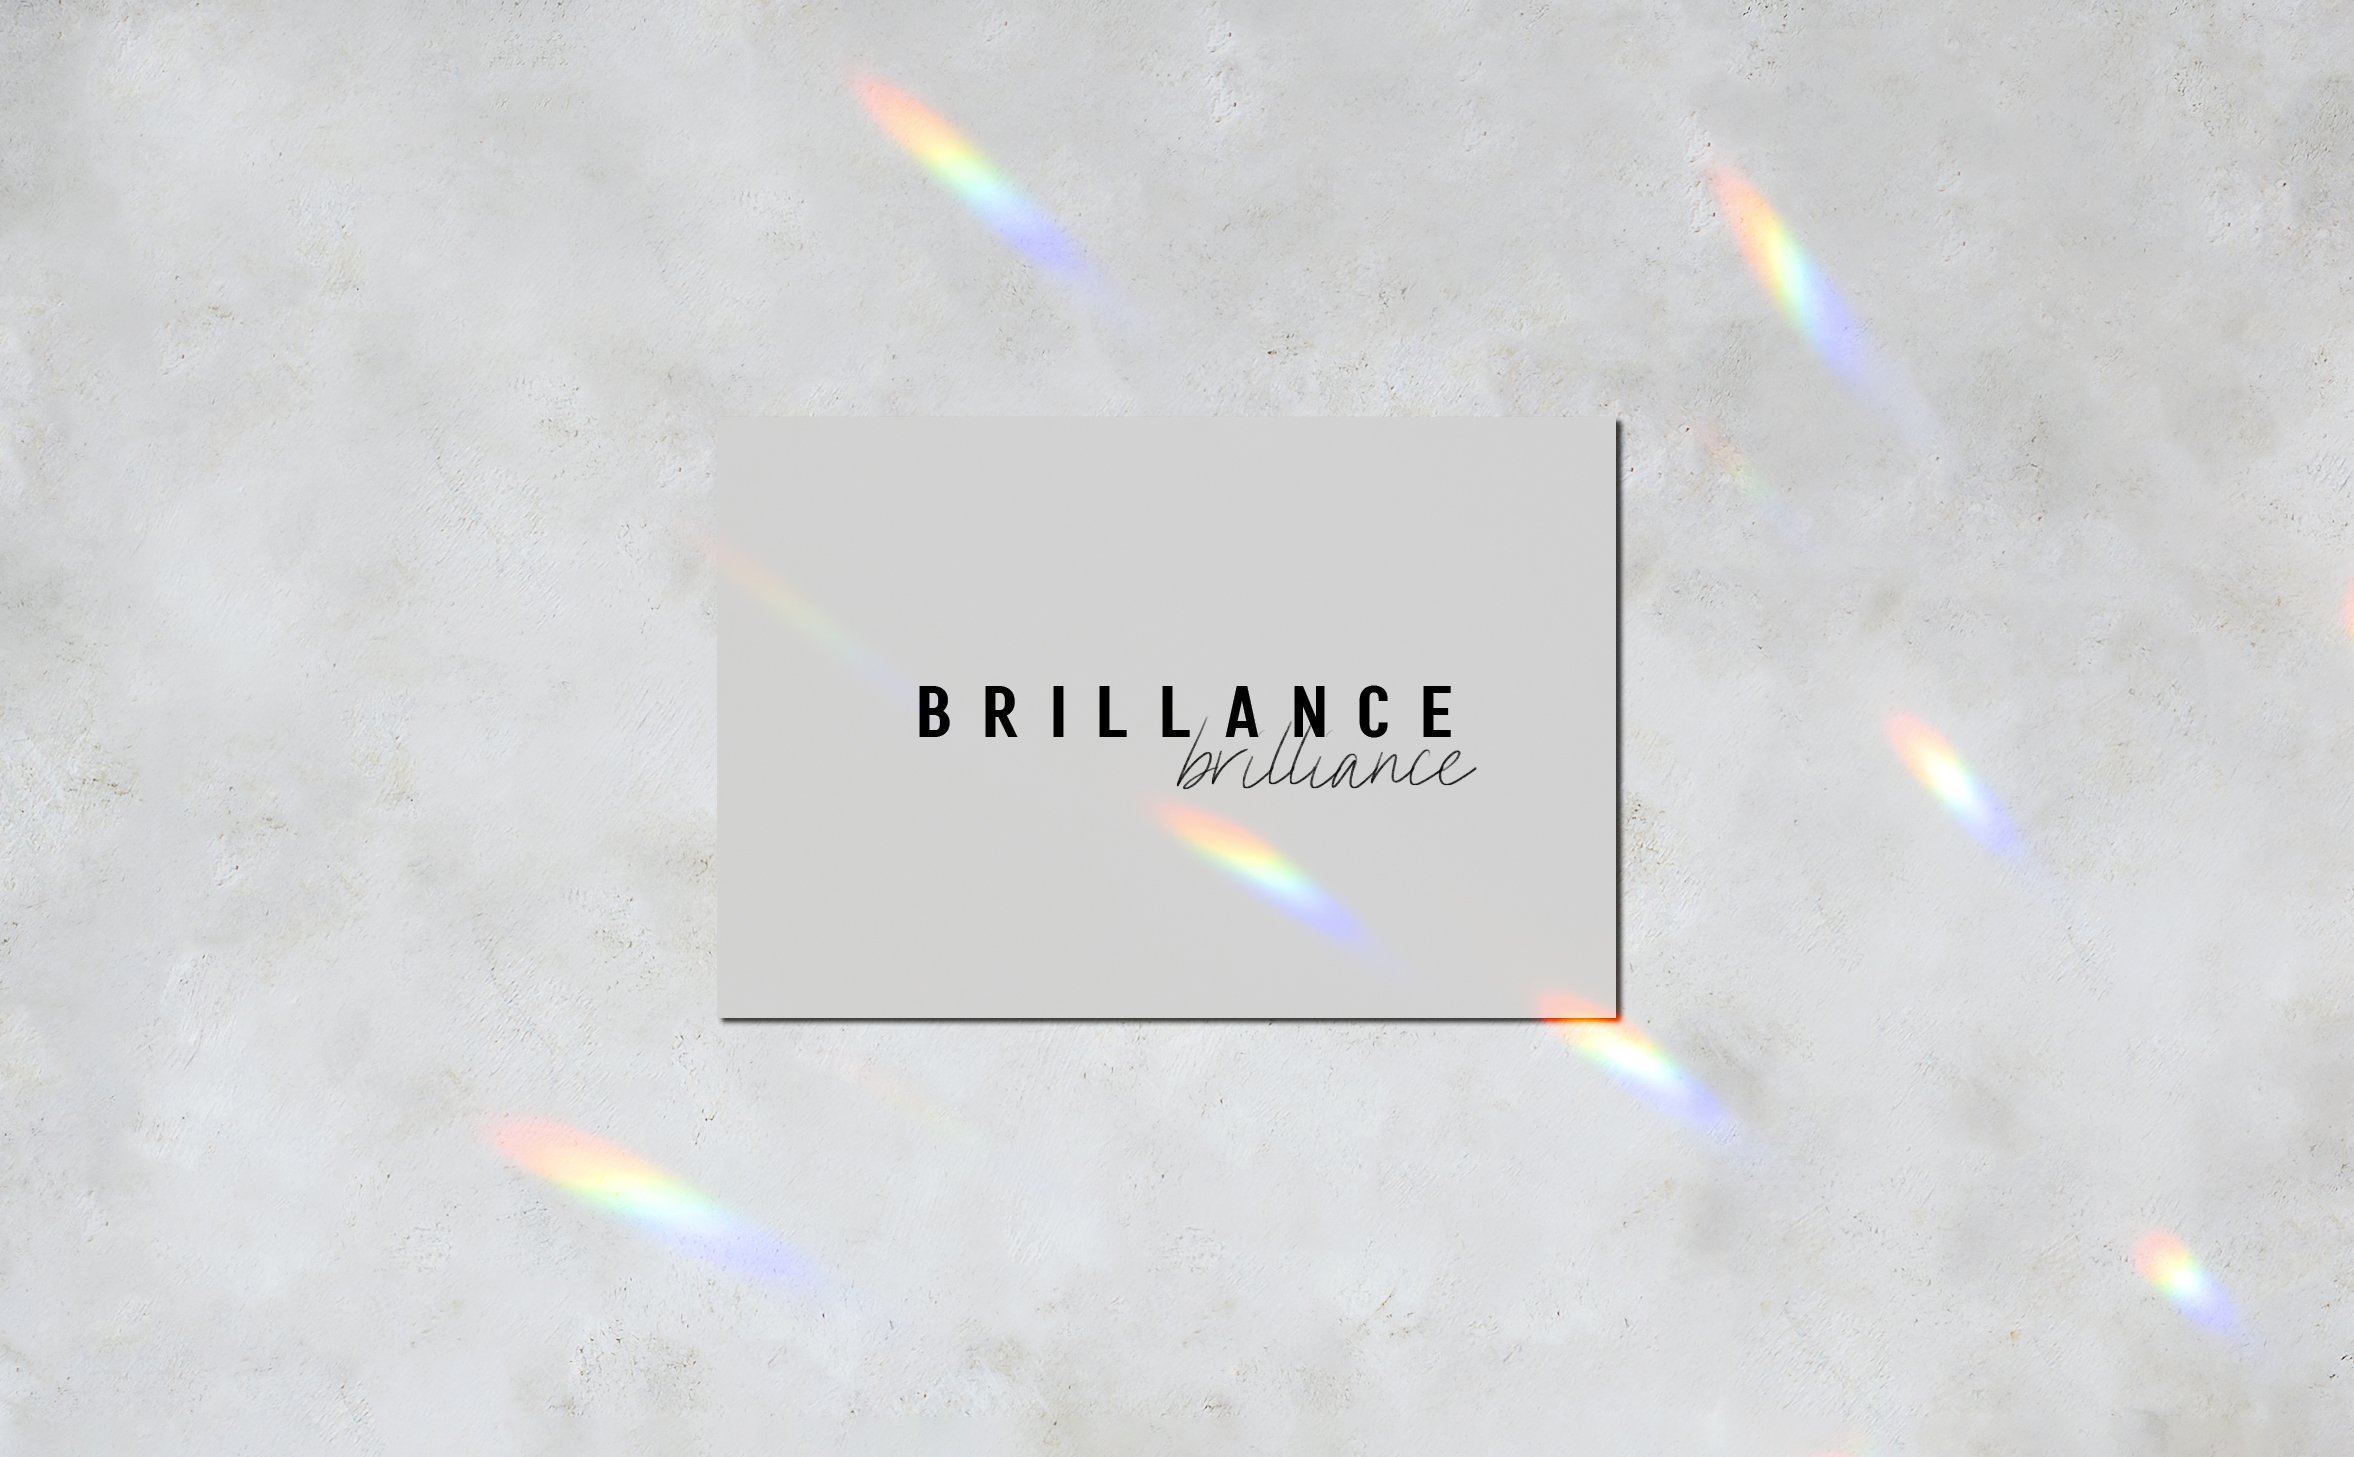 Brilliance | Prism Crystal Overlayspreview image.